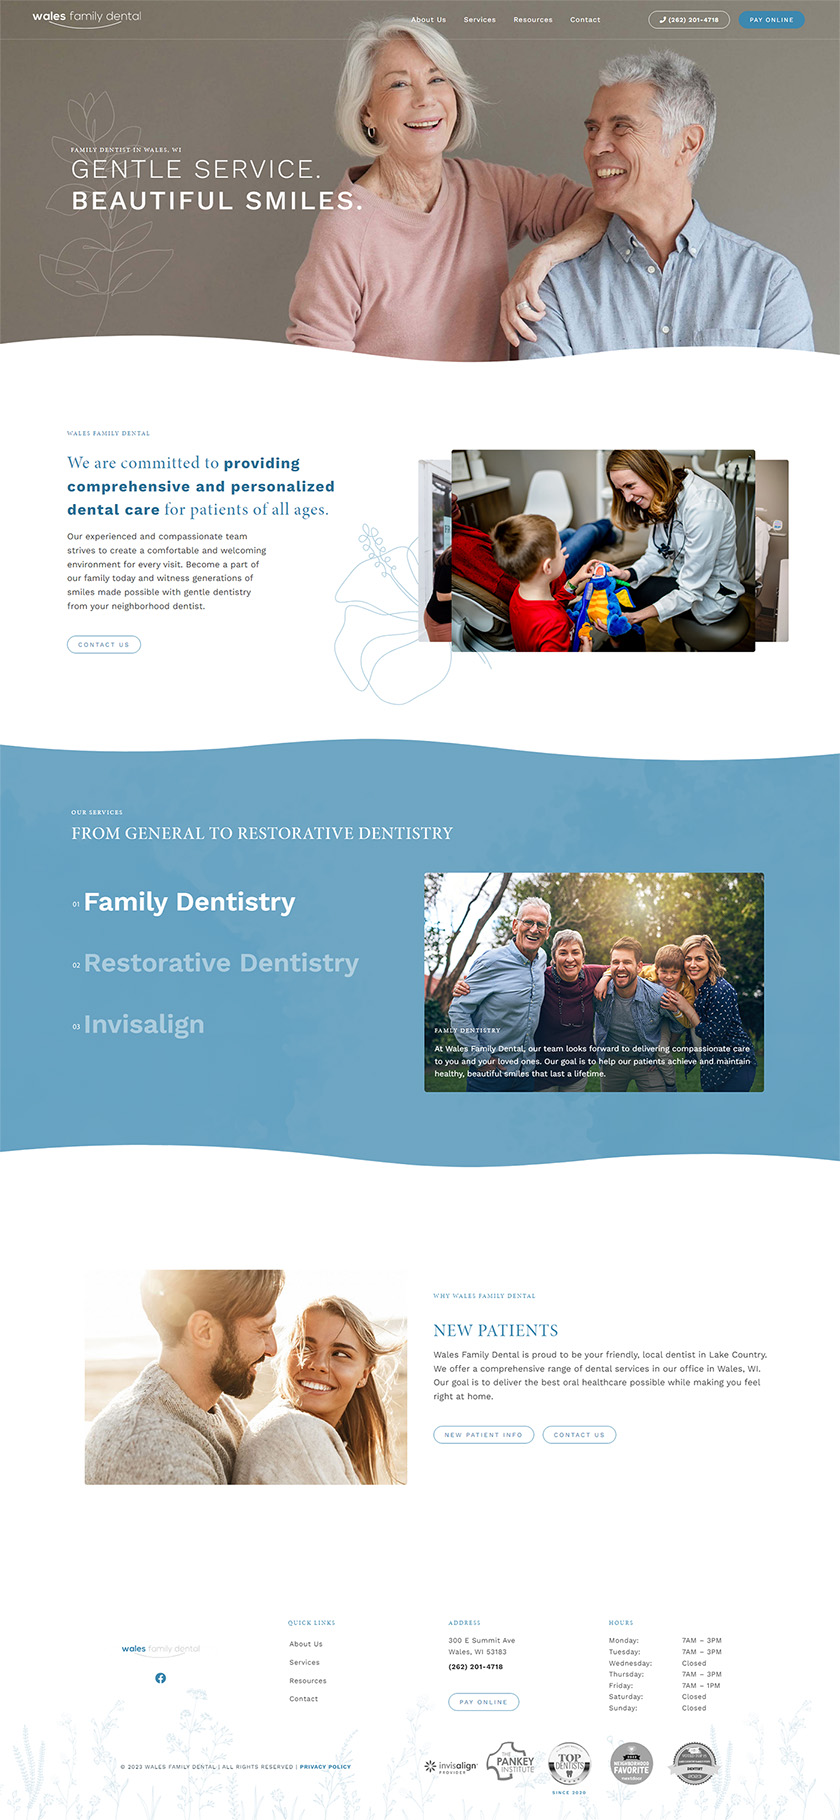 Wales Family Dental Homepage